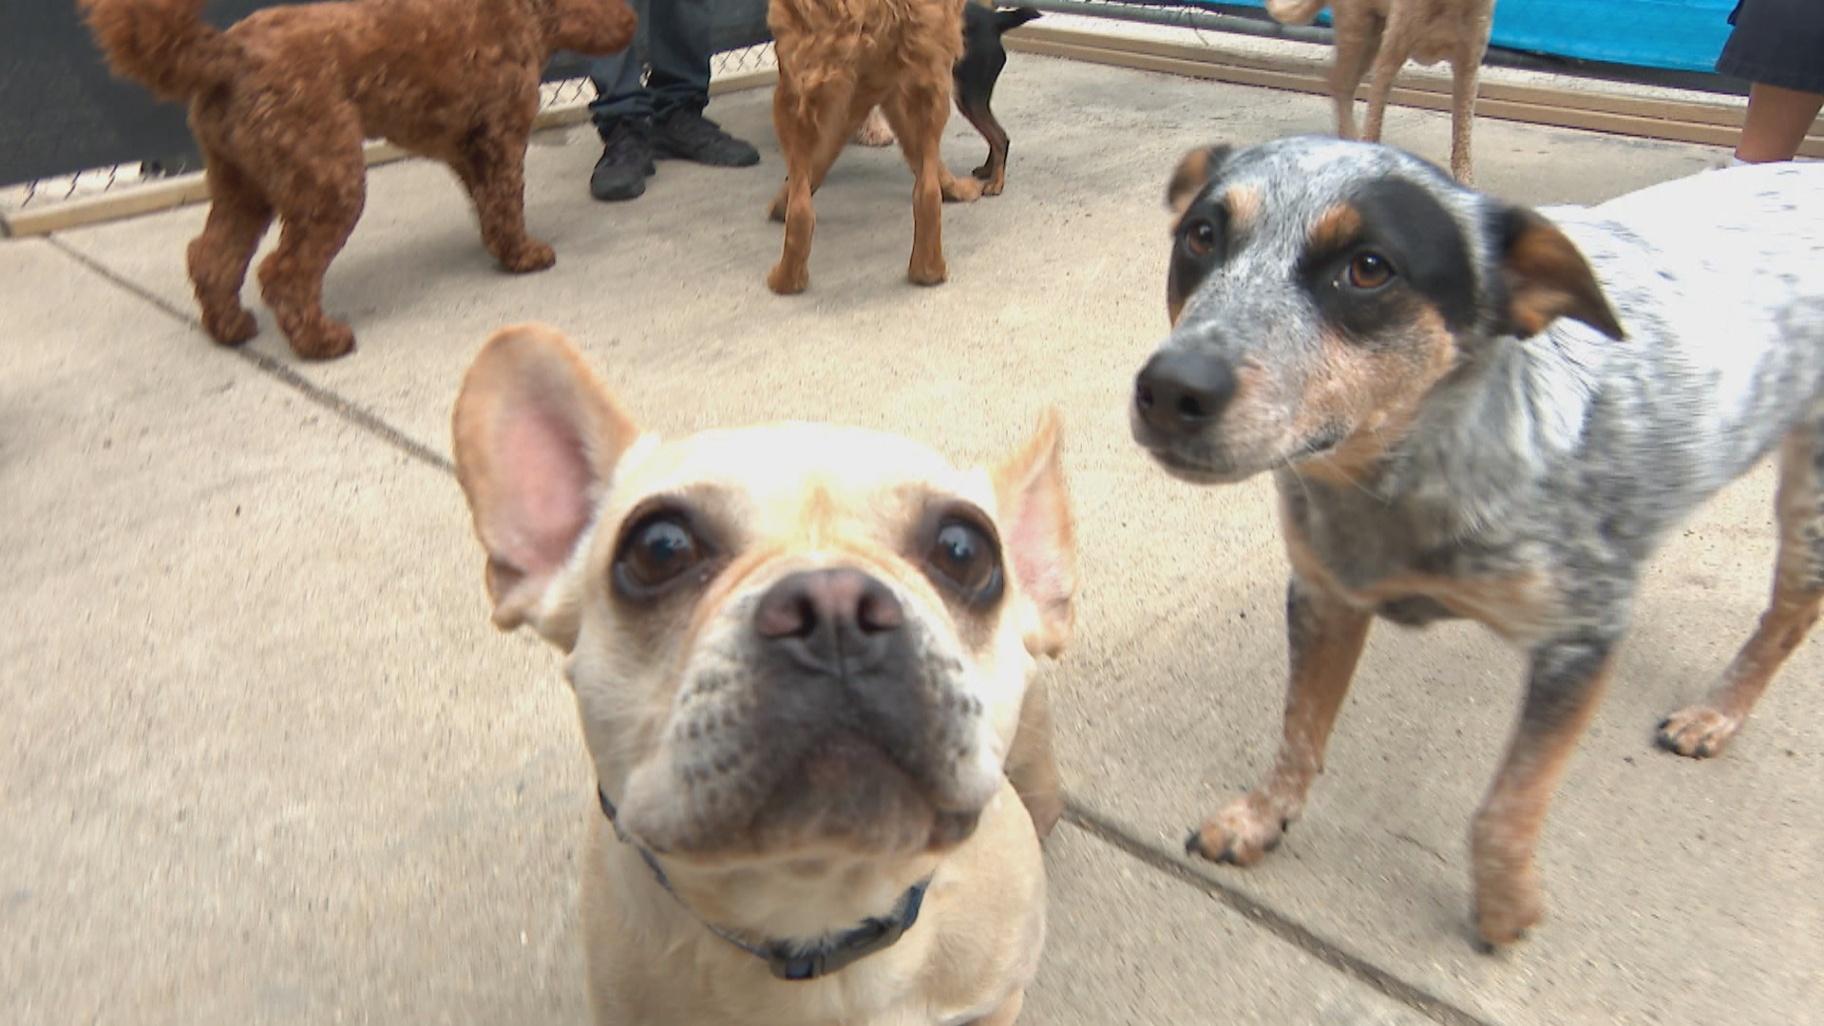 Dogs at Furry Paws Dog Day Care in Humboldt Park.  (WTTW News)